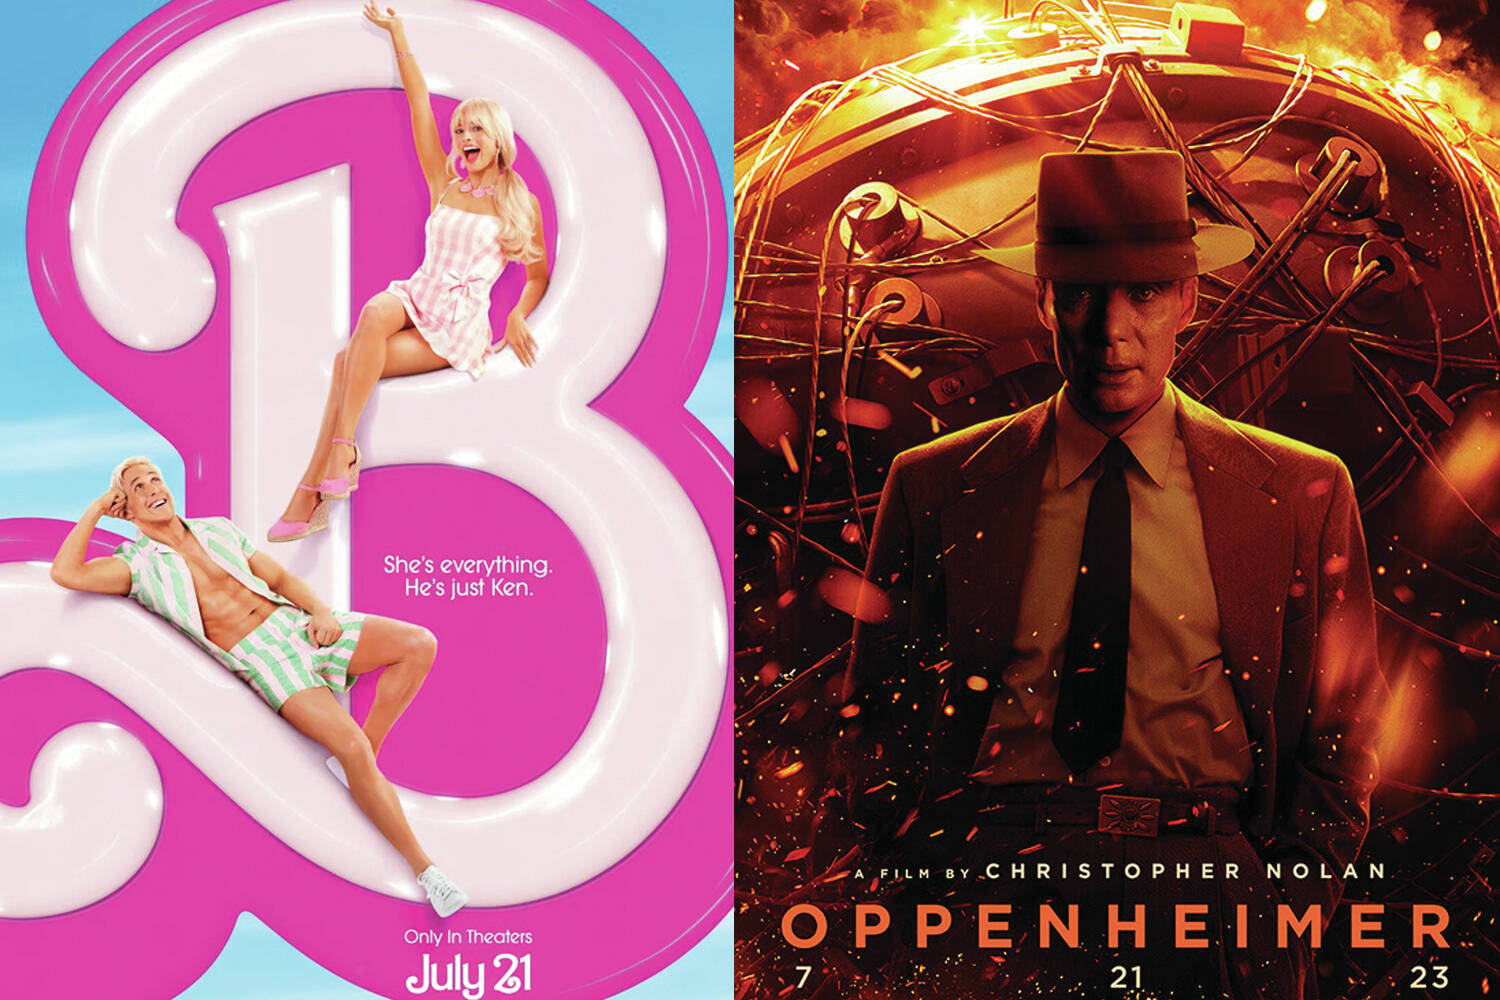 Photos courtesy WarnerMedia and Universal Pictures
Promotional material for both “Barbie” and “Oppenheimer.”